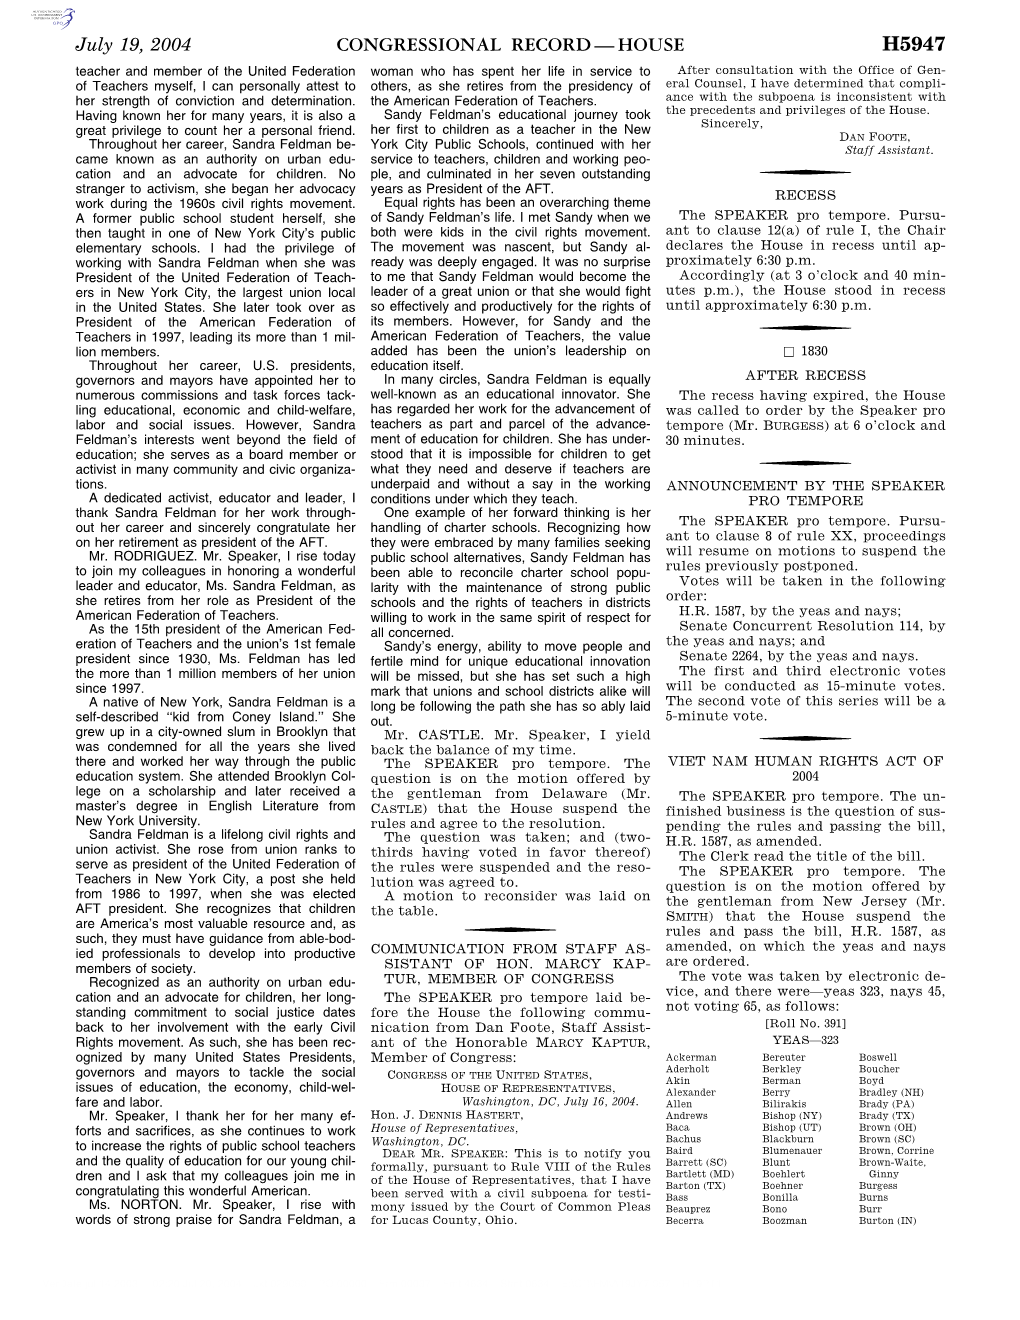 Congressional Record—House H5947